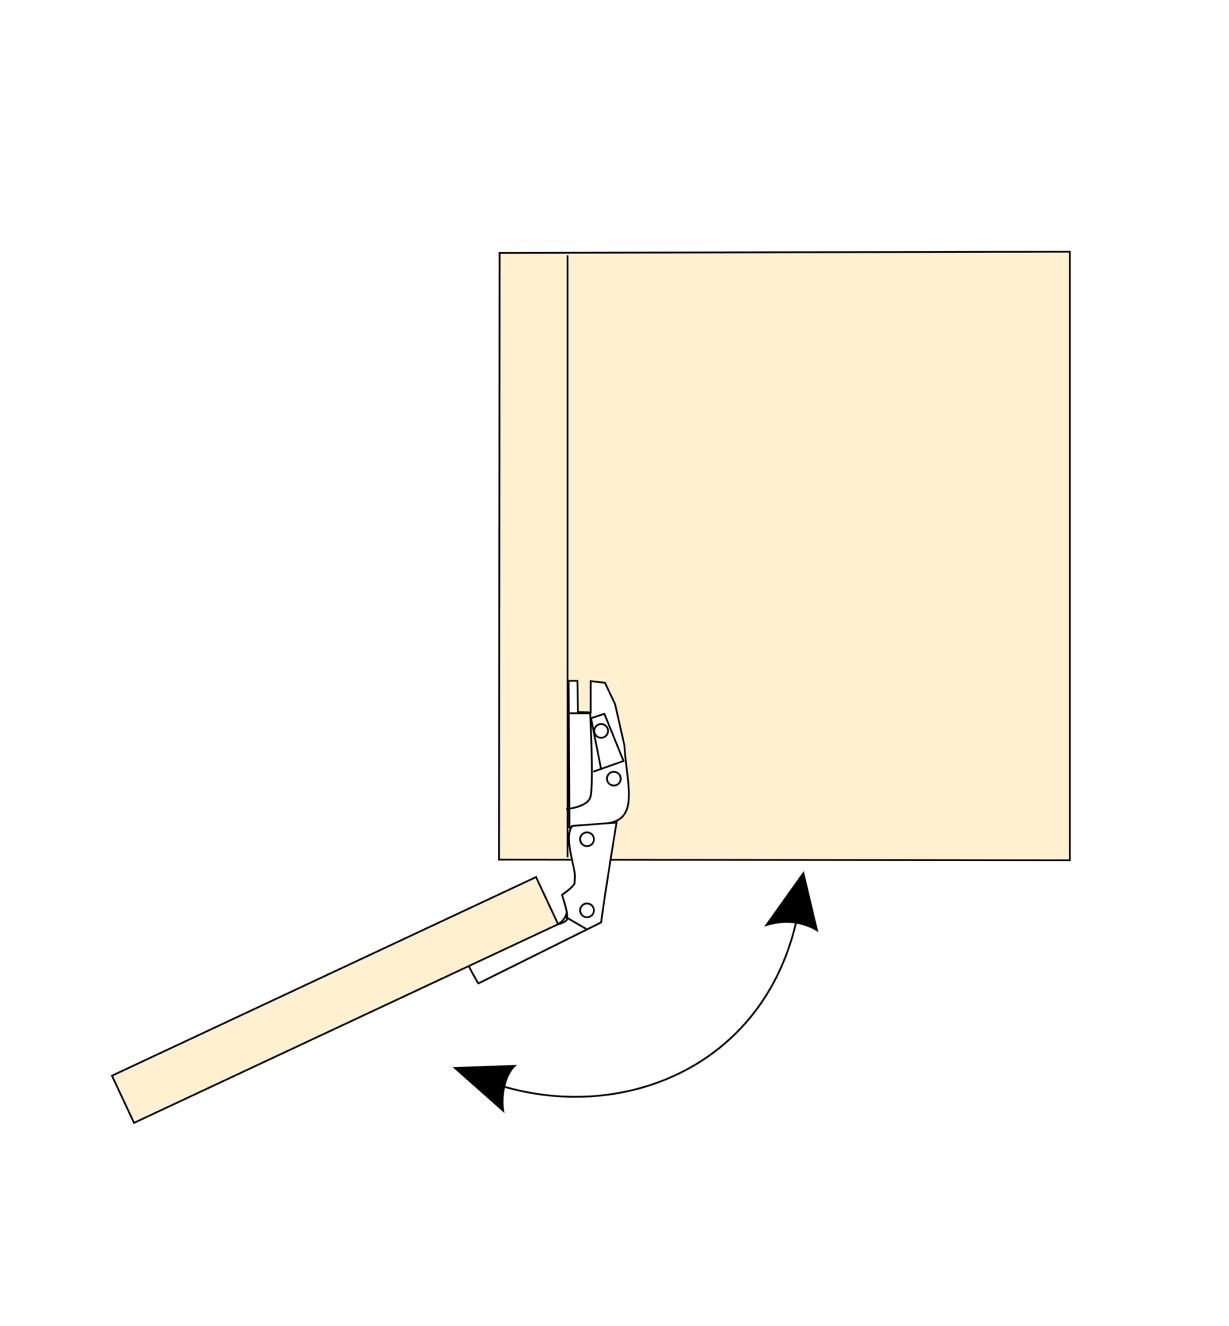 Diagram of a door showing maximum opening angle of a Blum standard 155° zero-protrusion soft-close clip-top overlay hinge